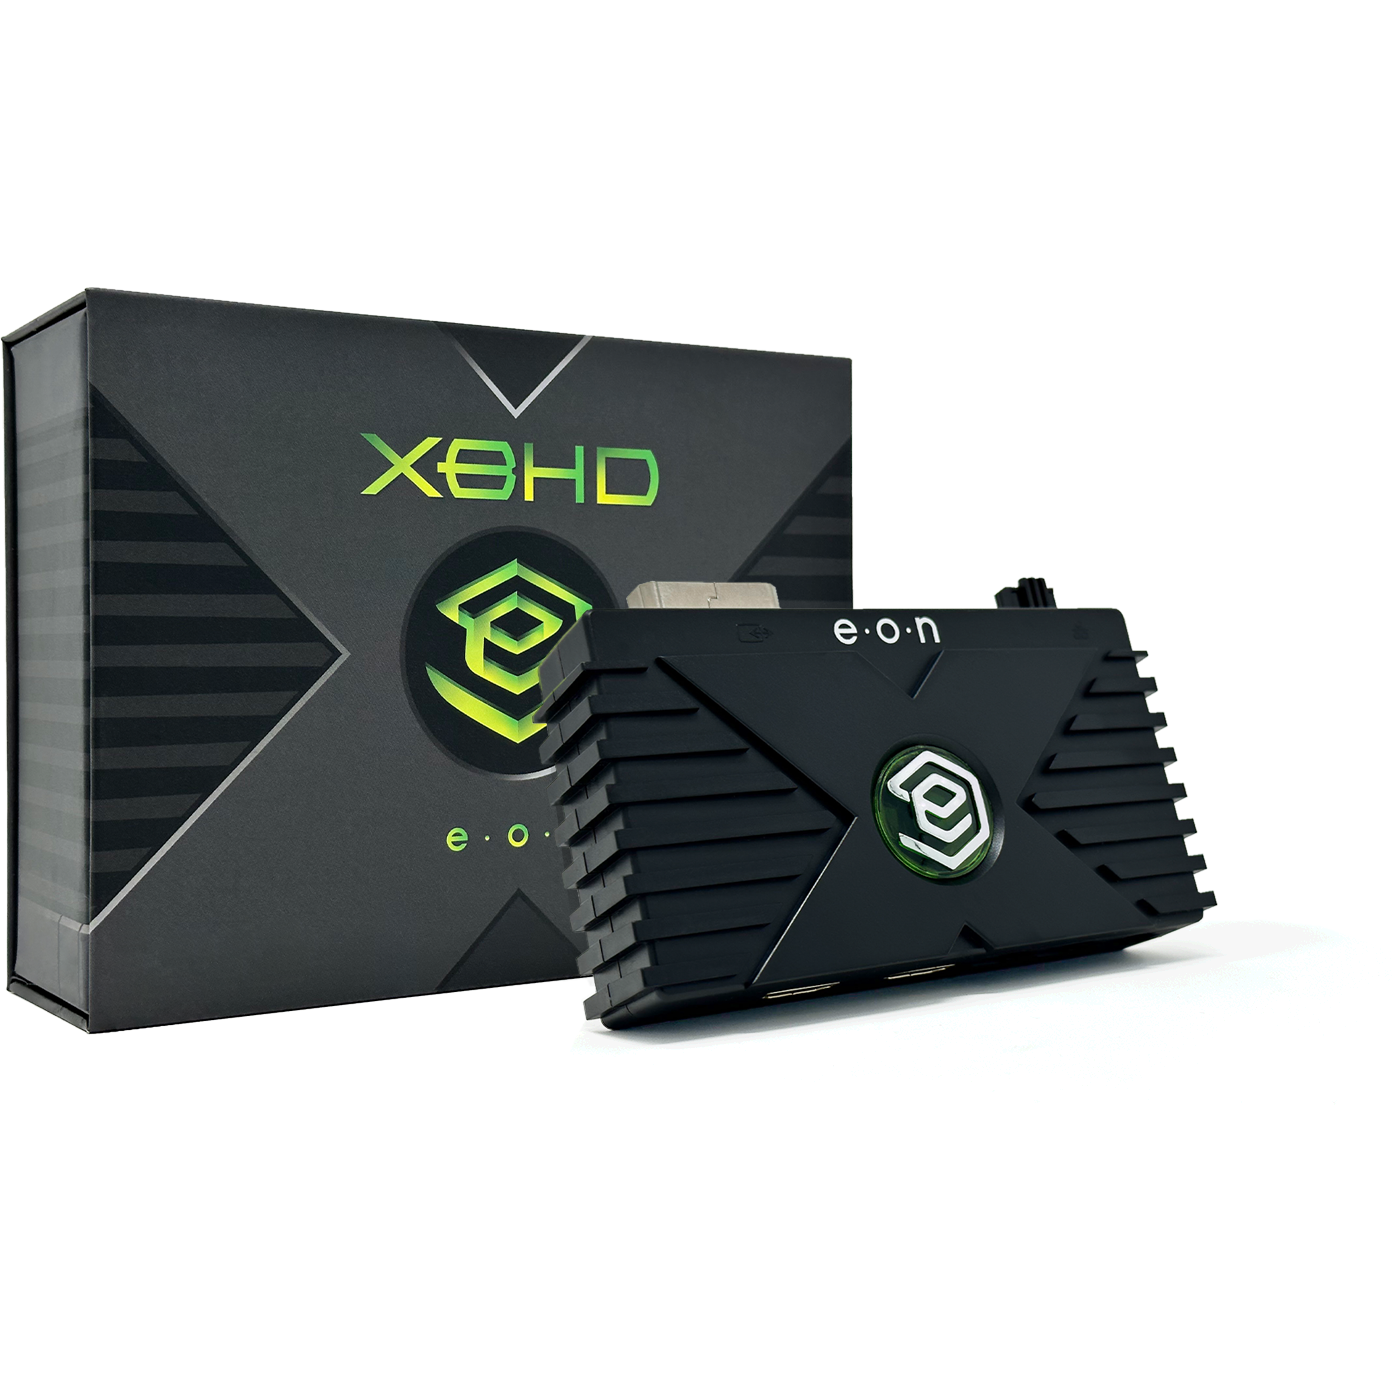 EON XBHD plug-and-play HD adapter for the original Xbox